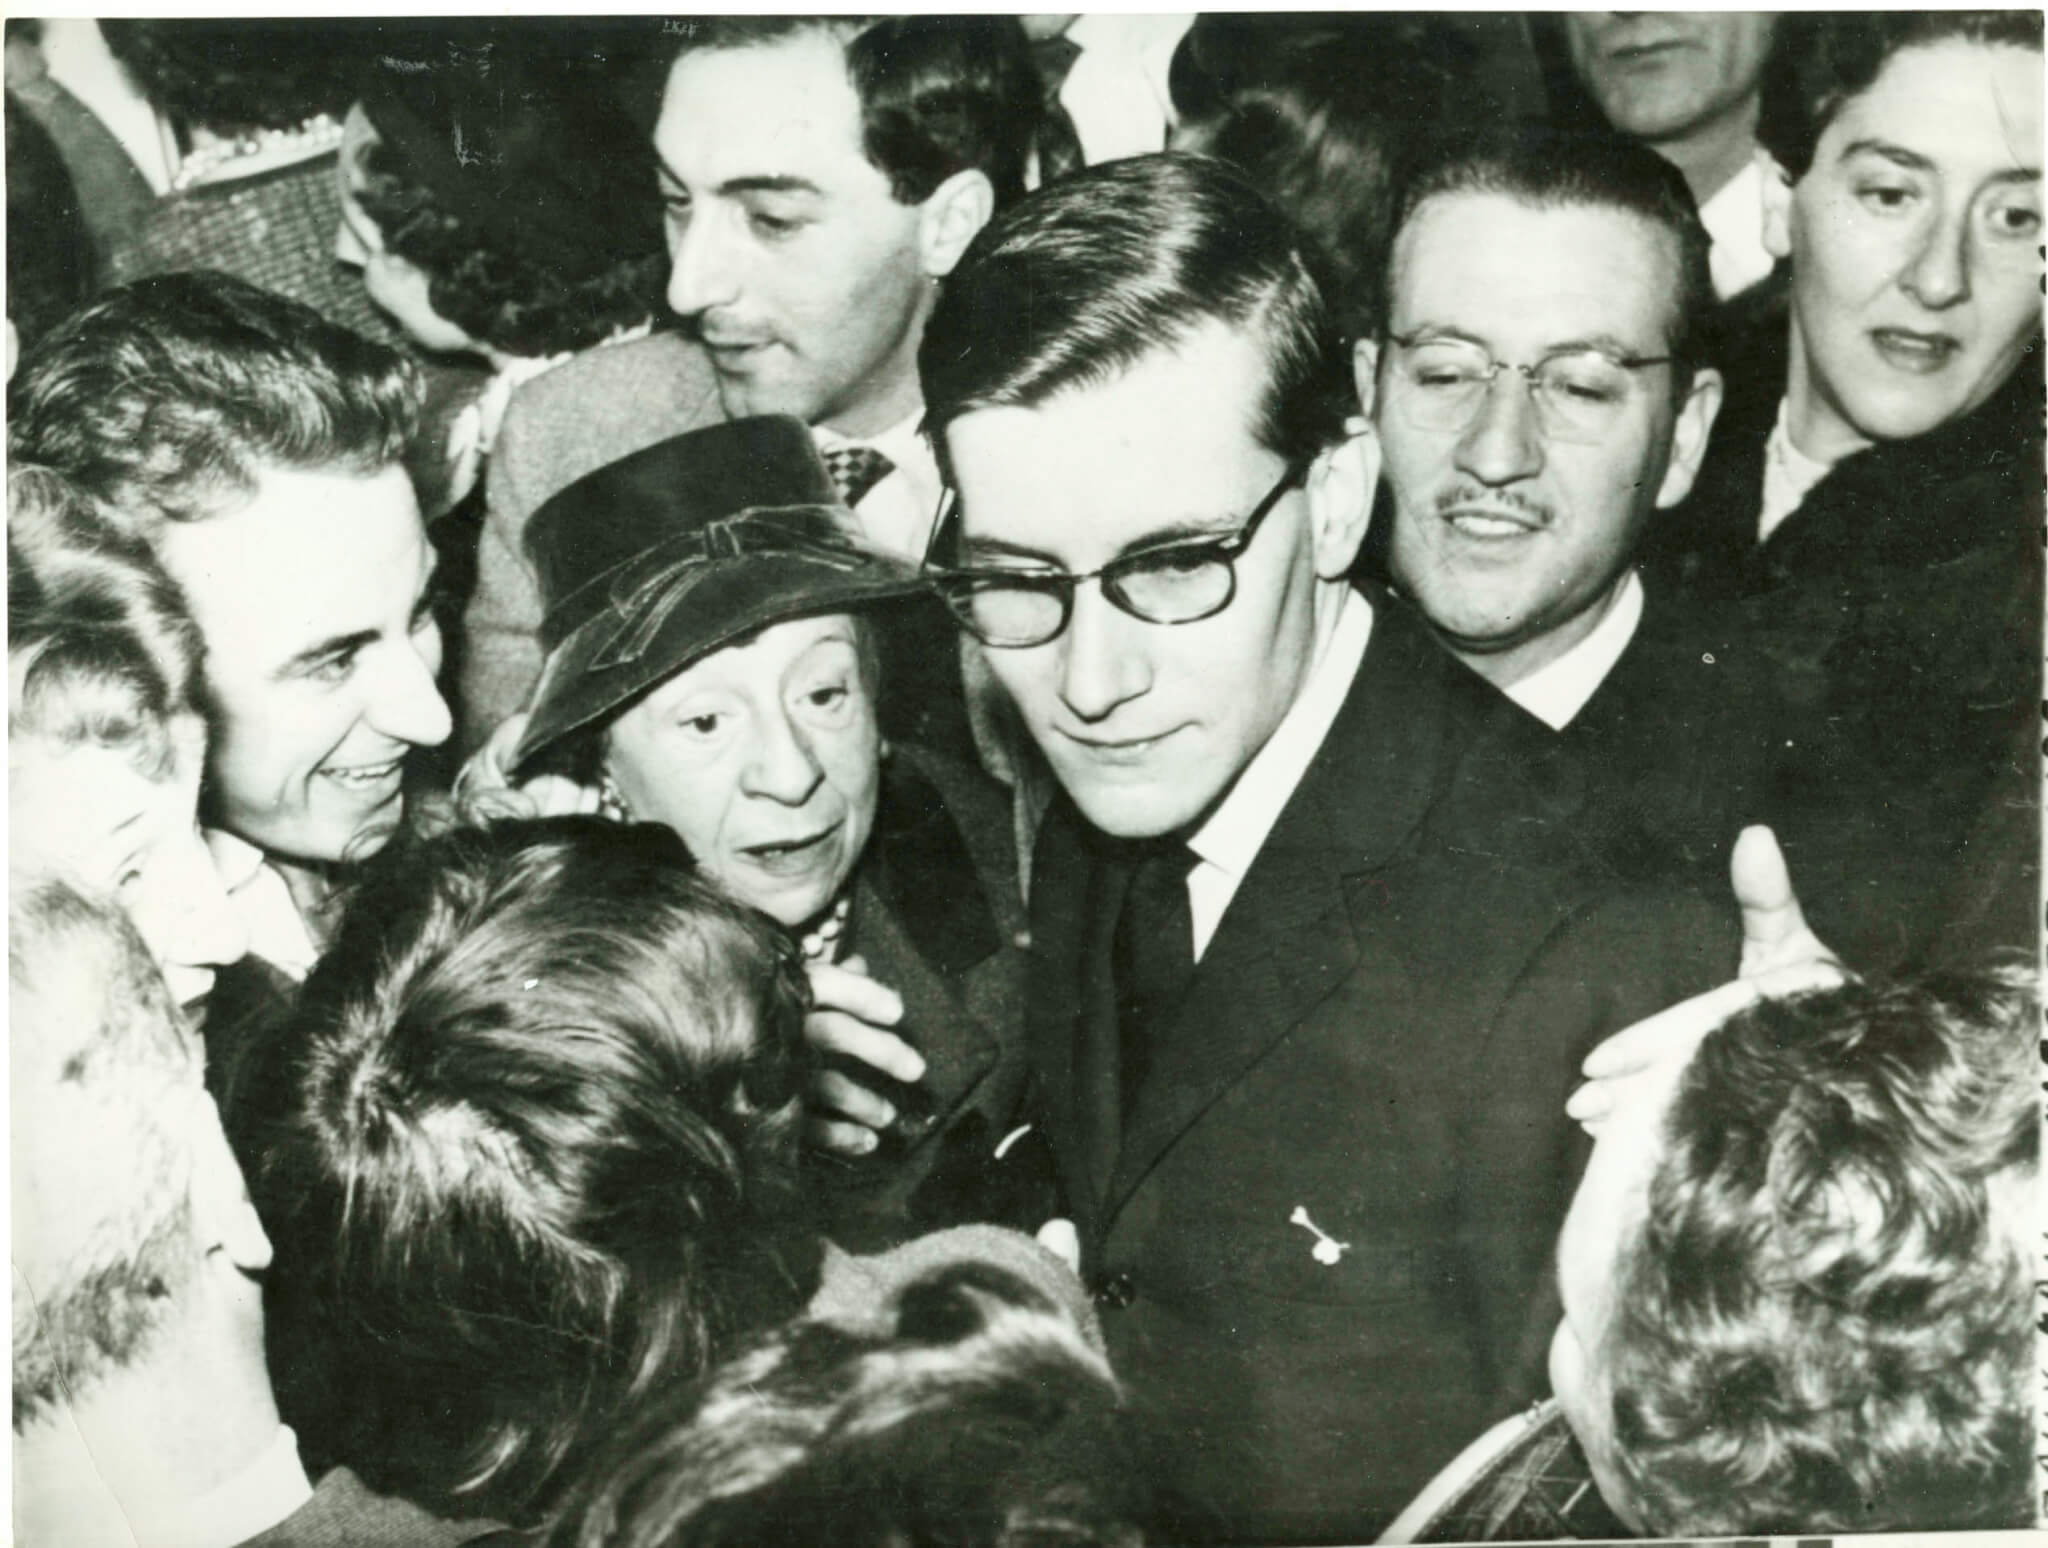 Yves Saint Laurent is greeted by a crowd after a big show in Paris.